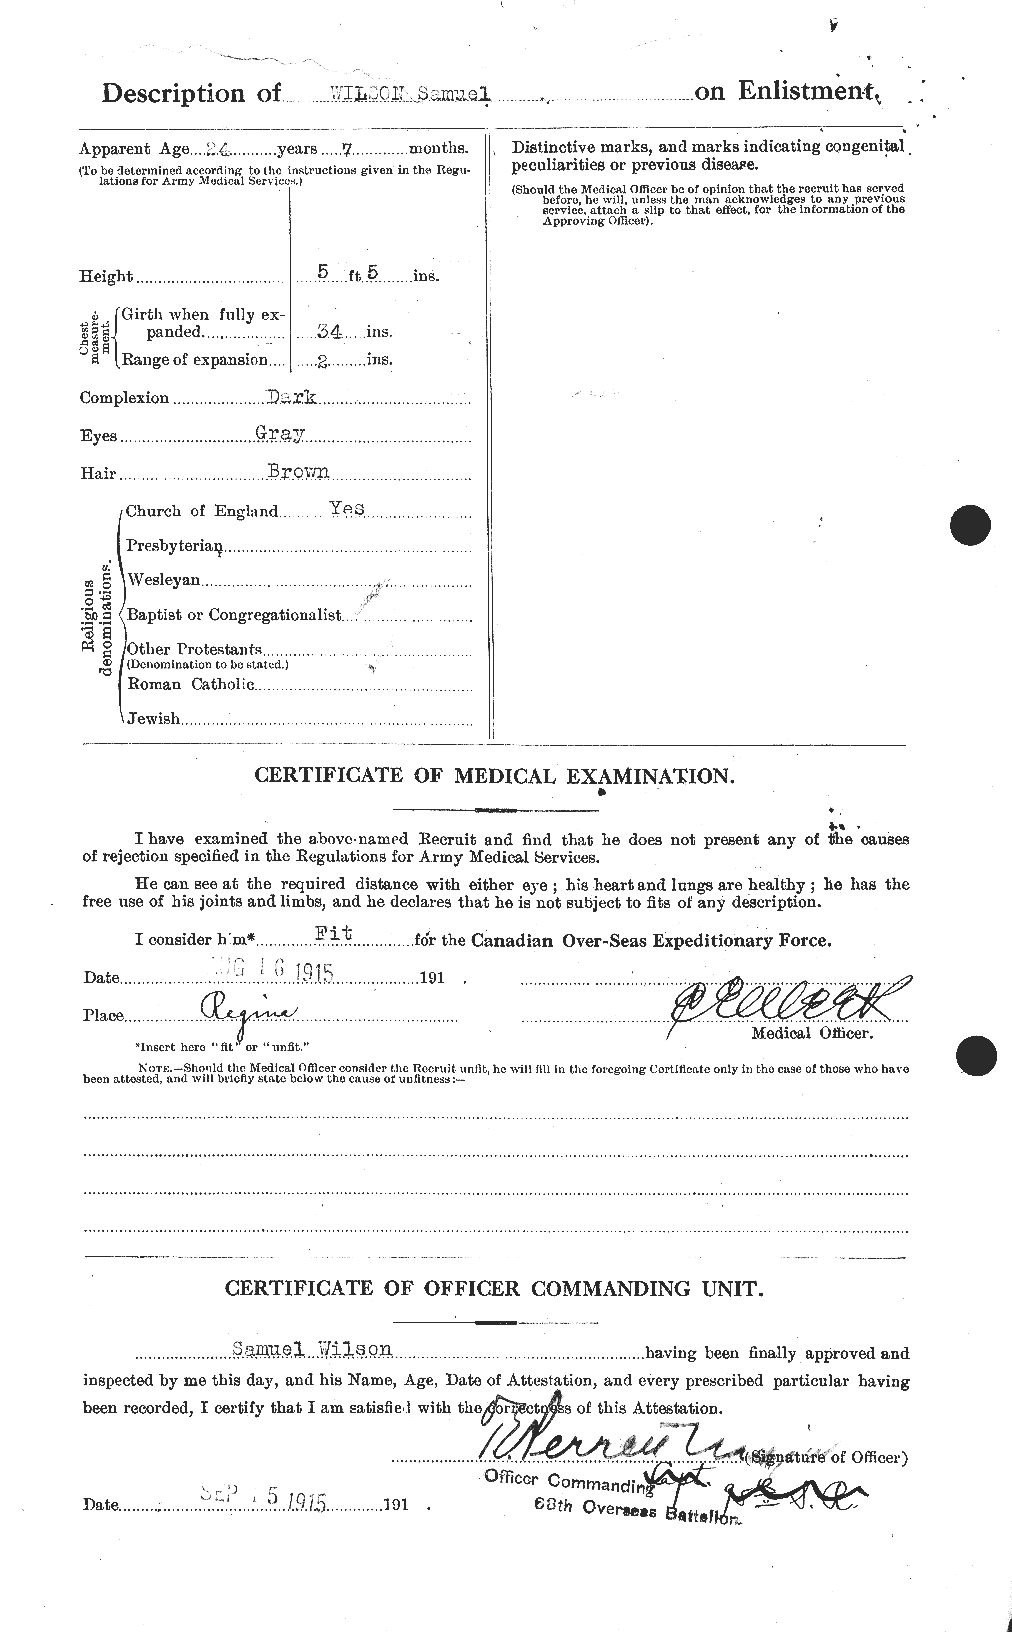 Personnel Records of the First World War - CEF 681096b